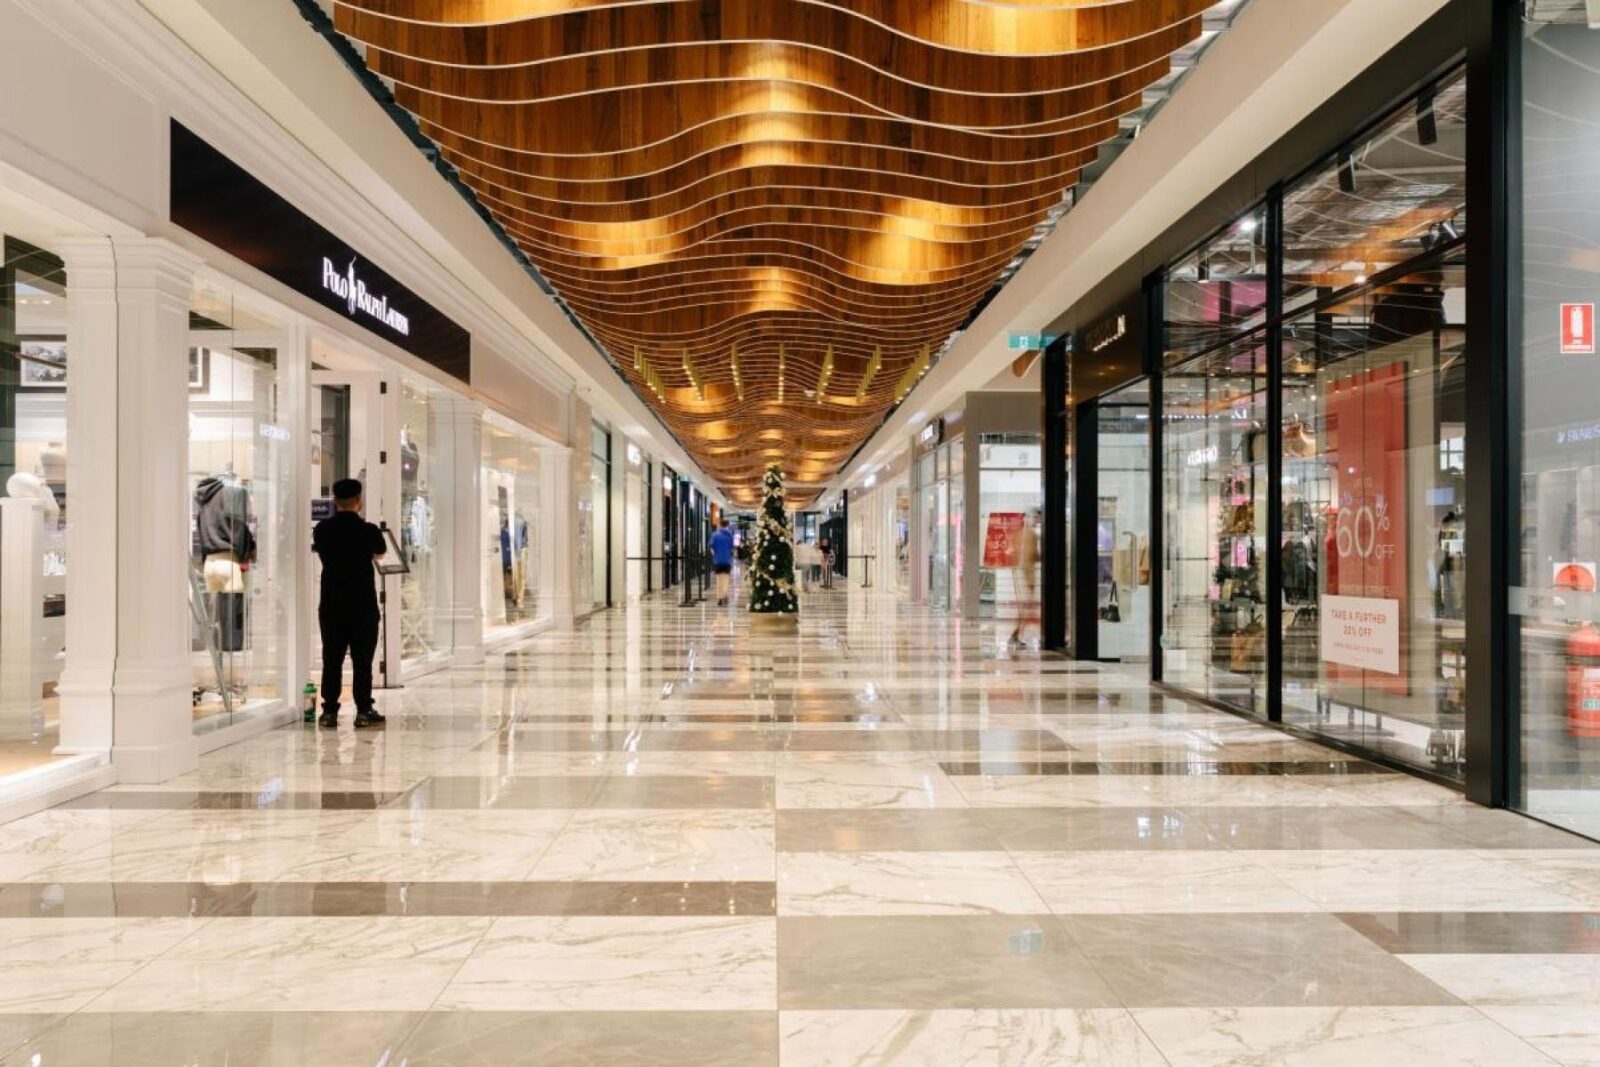 Corridor of shops at an outlet centre in Canberra.